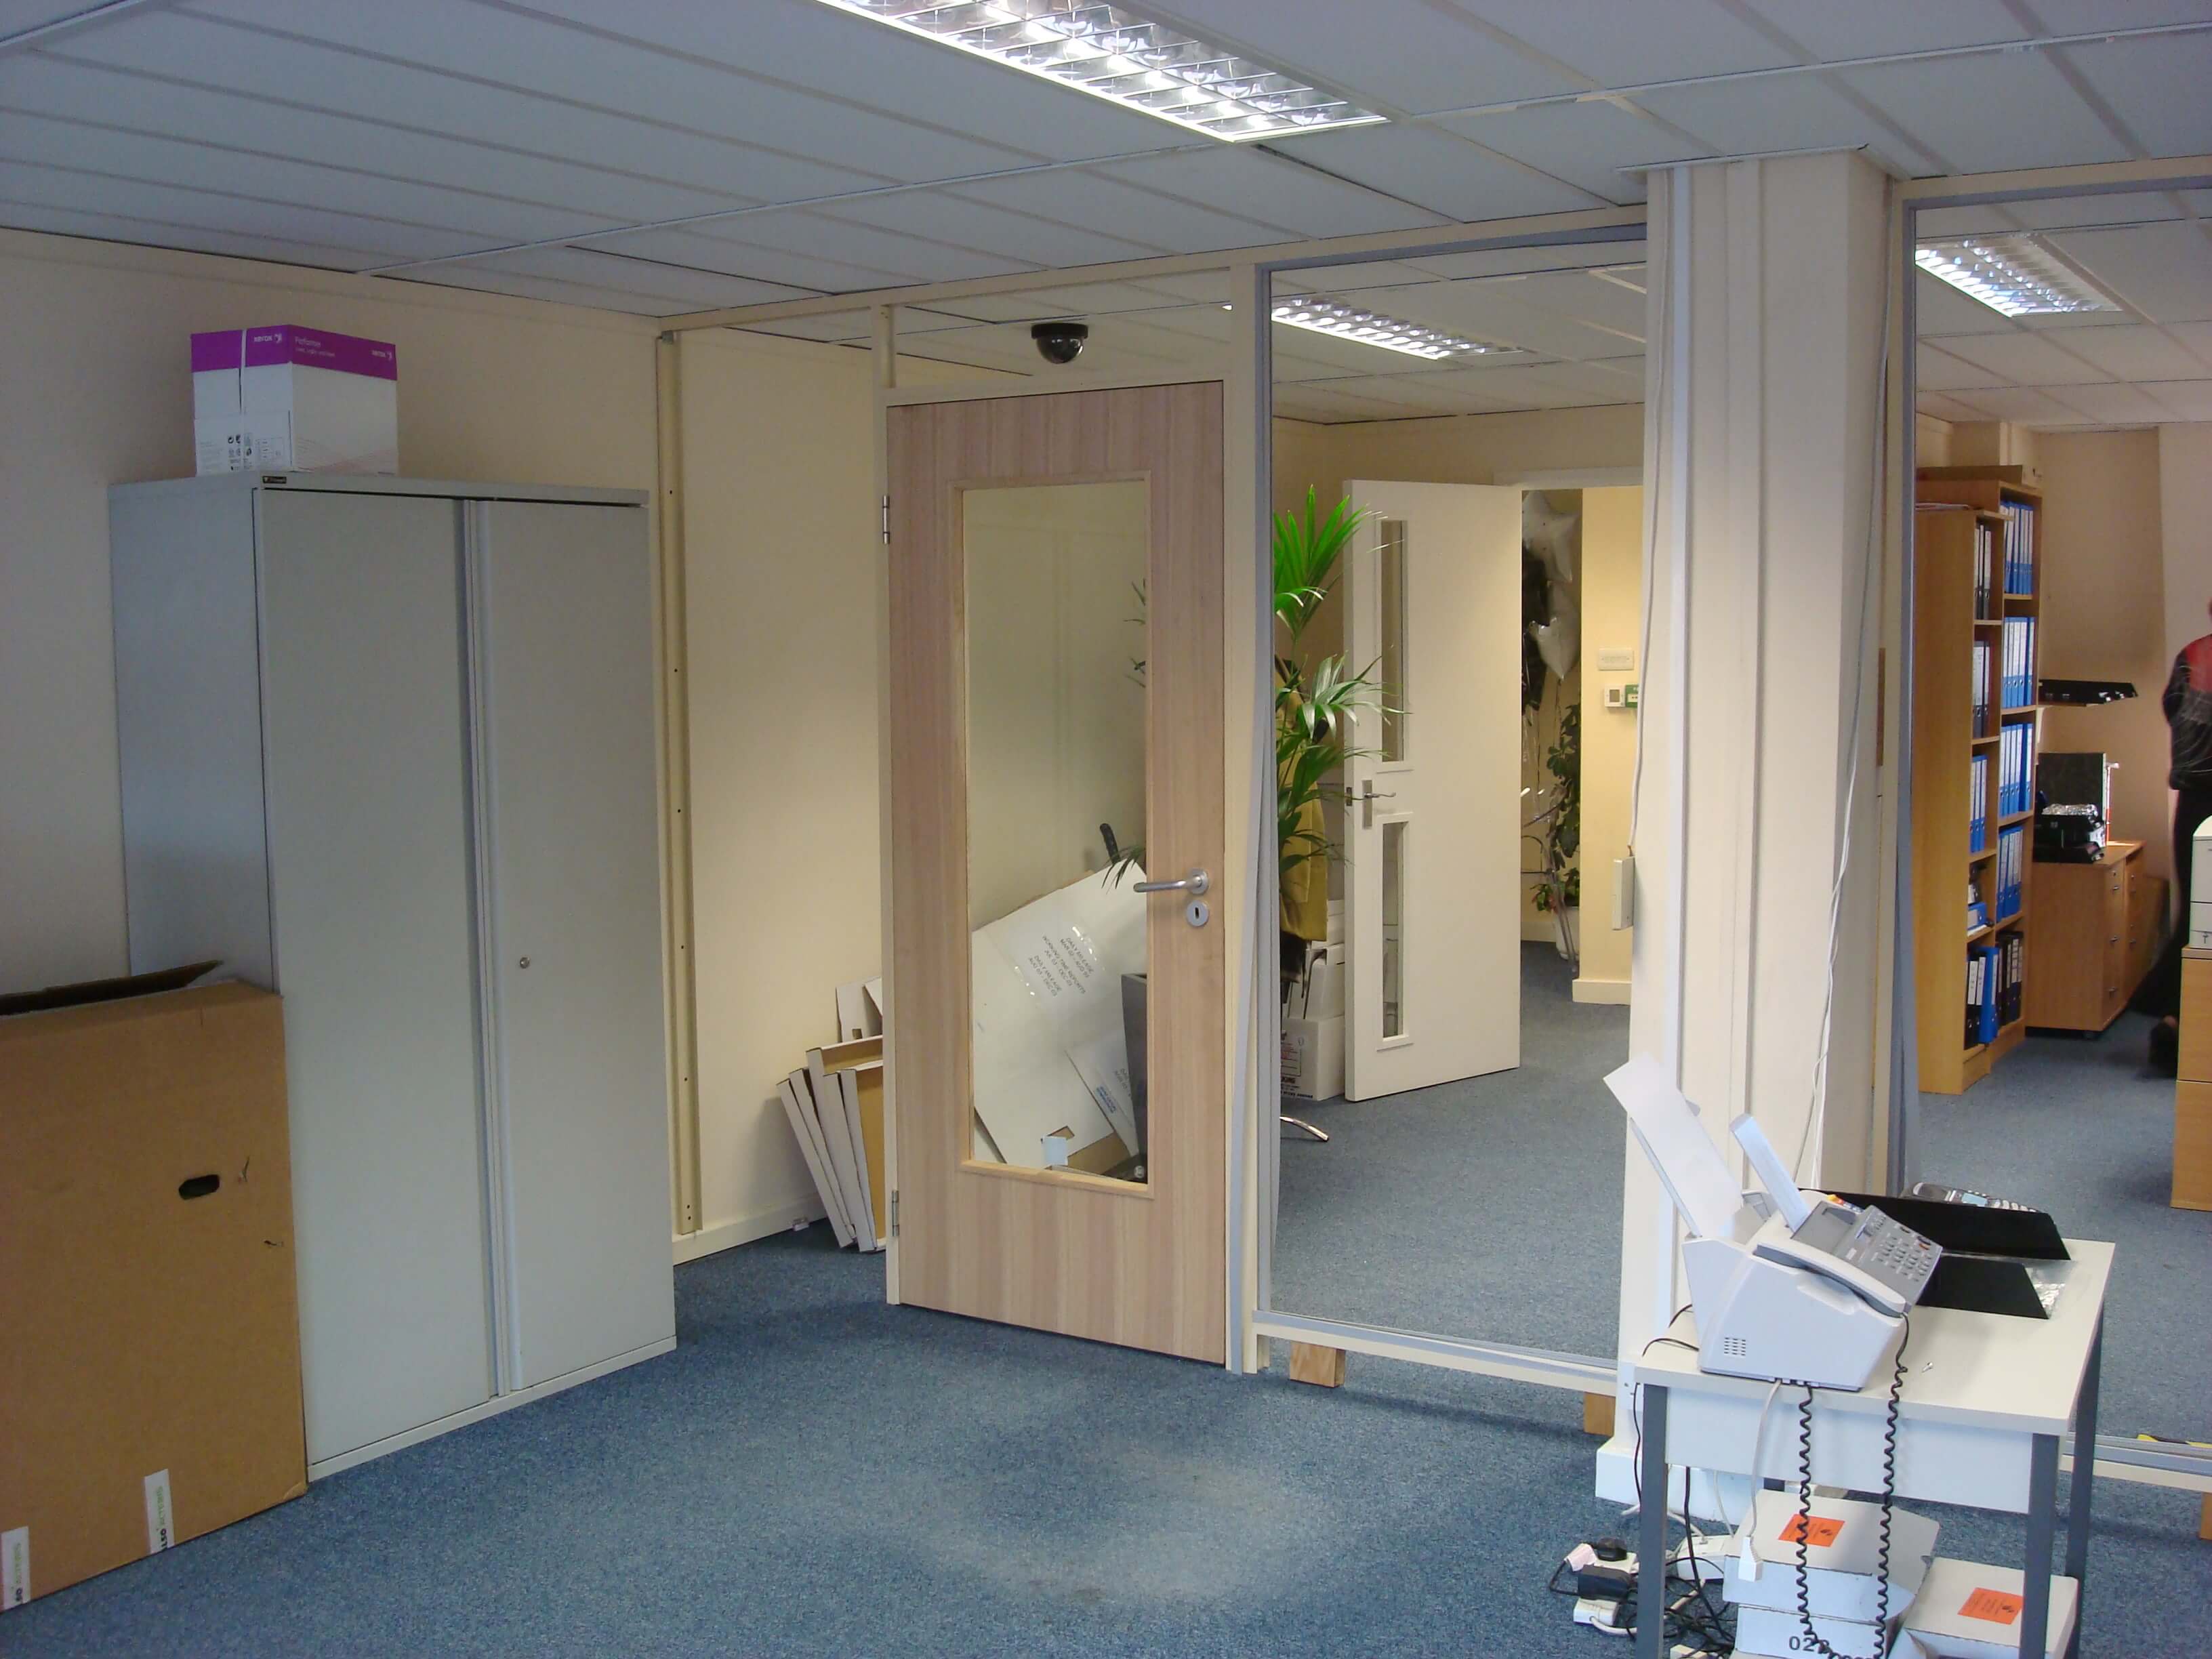 New door installed to same size as the existing one further in the office.